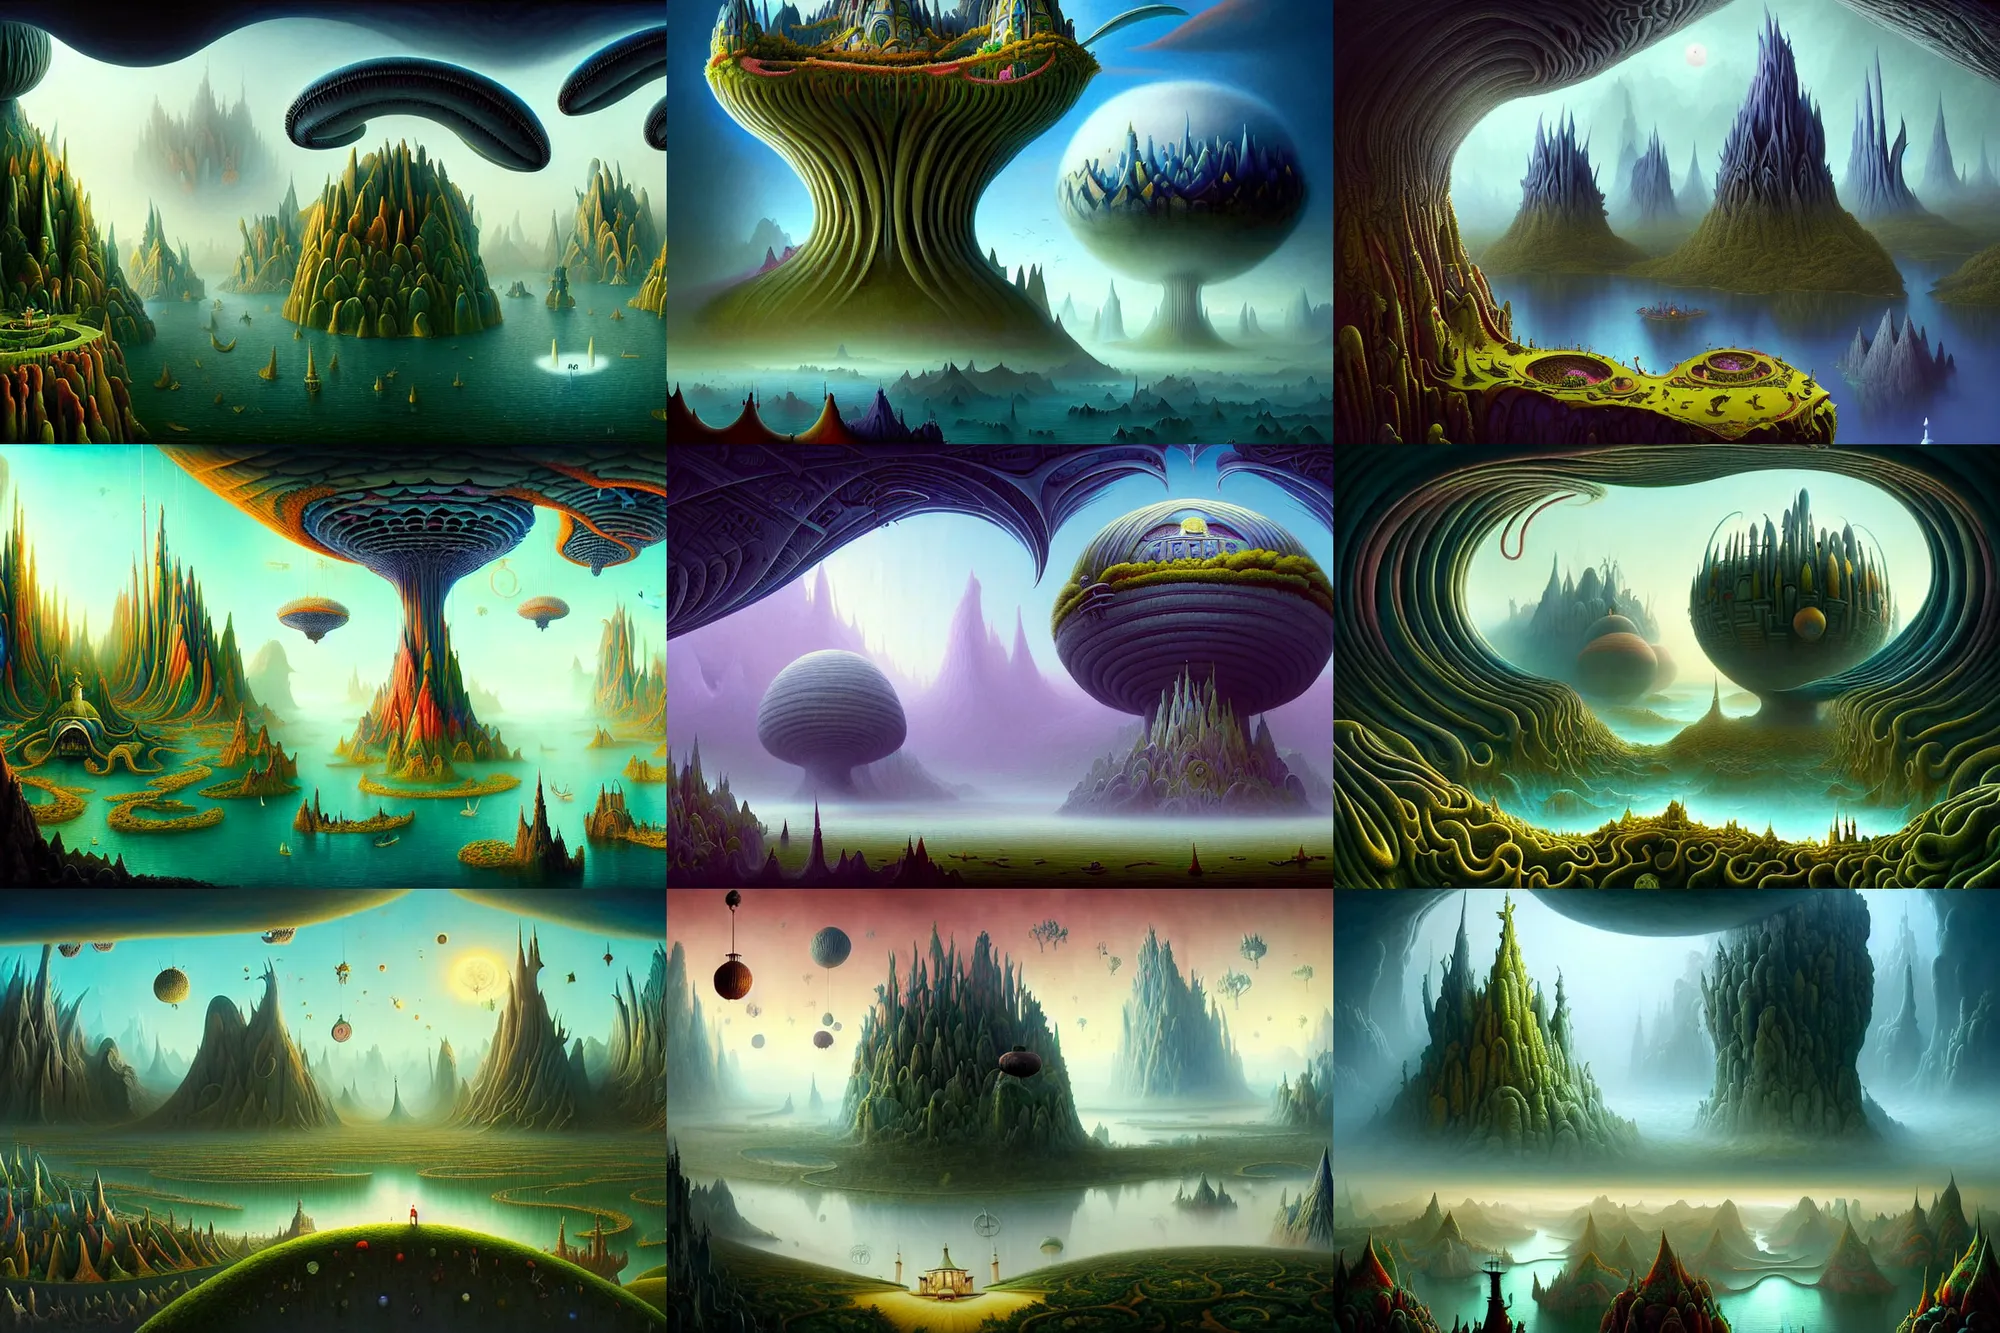 Prompt: a beguiling epic stunning beautiful and insanely detailed matte painting of alien dream worlds with surreal architecture designed by Heironymous Bosch, mega structures inspired by Heironymous Bosch's Garden of Earthly Delights, vast surreal landscape and horizon by Asher Durand and Tyler Edlin and Cyril Rolando and Raymond Swanland, masterpiece!!, grand!, imaginative!!!, whimsical!!, epic scale, intricate details, sense of awe, elite, wonder, insanely complex, masterful composition, sharp focus, fantasy realism, dramatic lighting